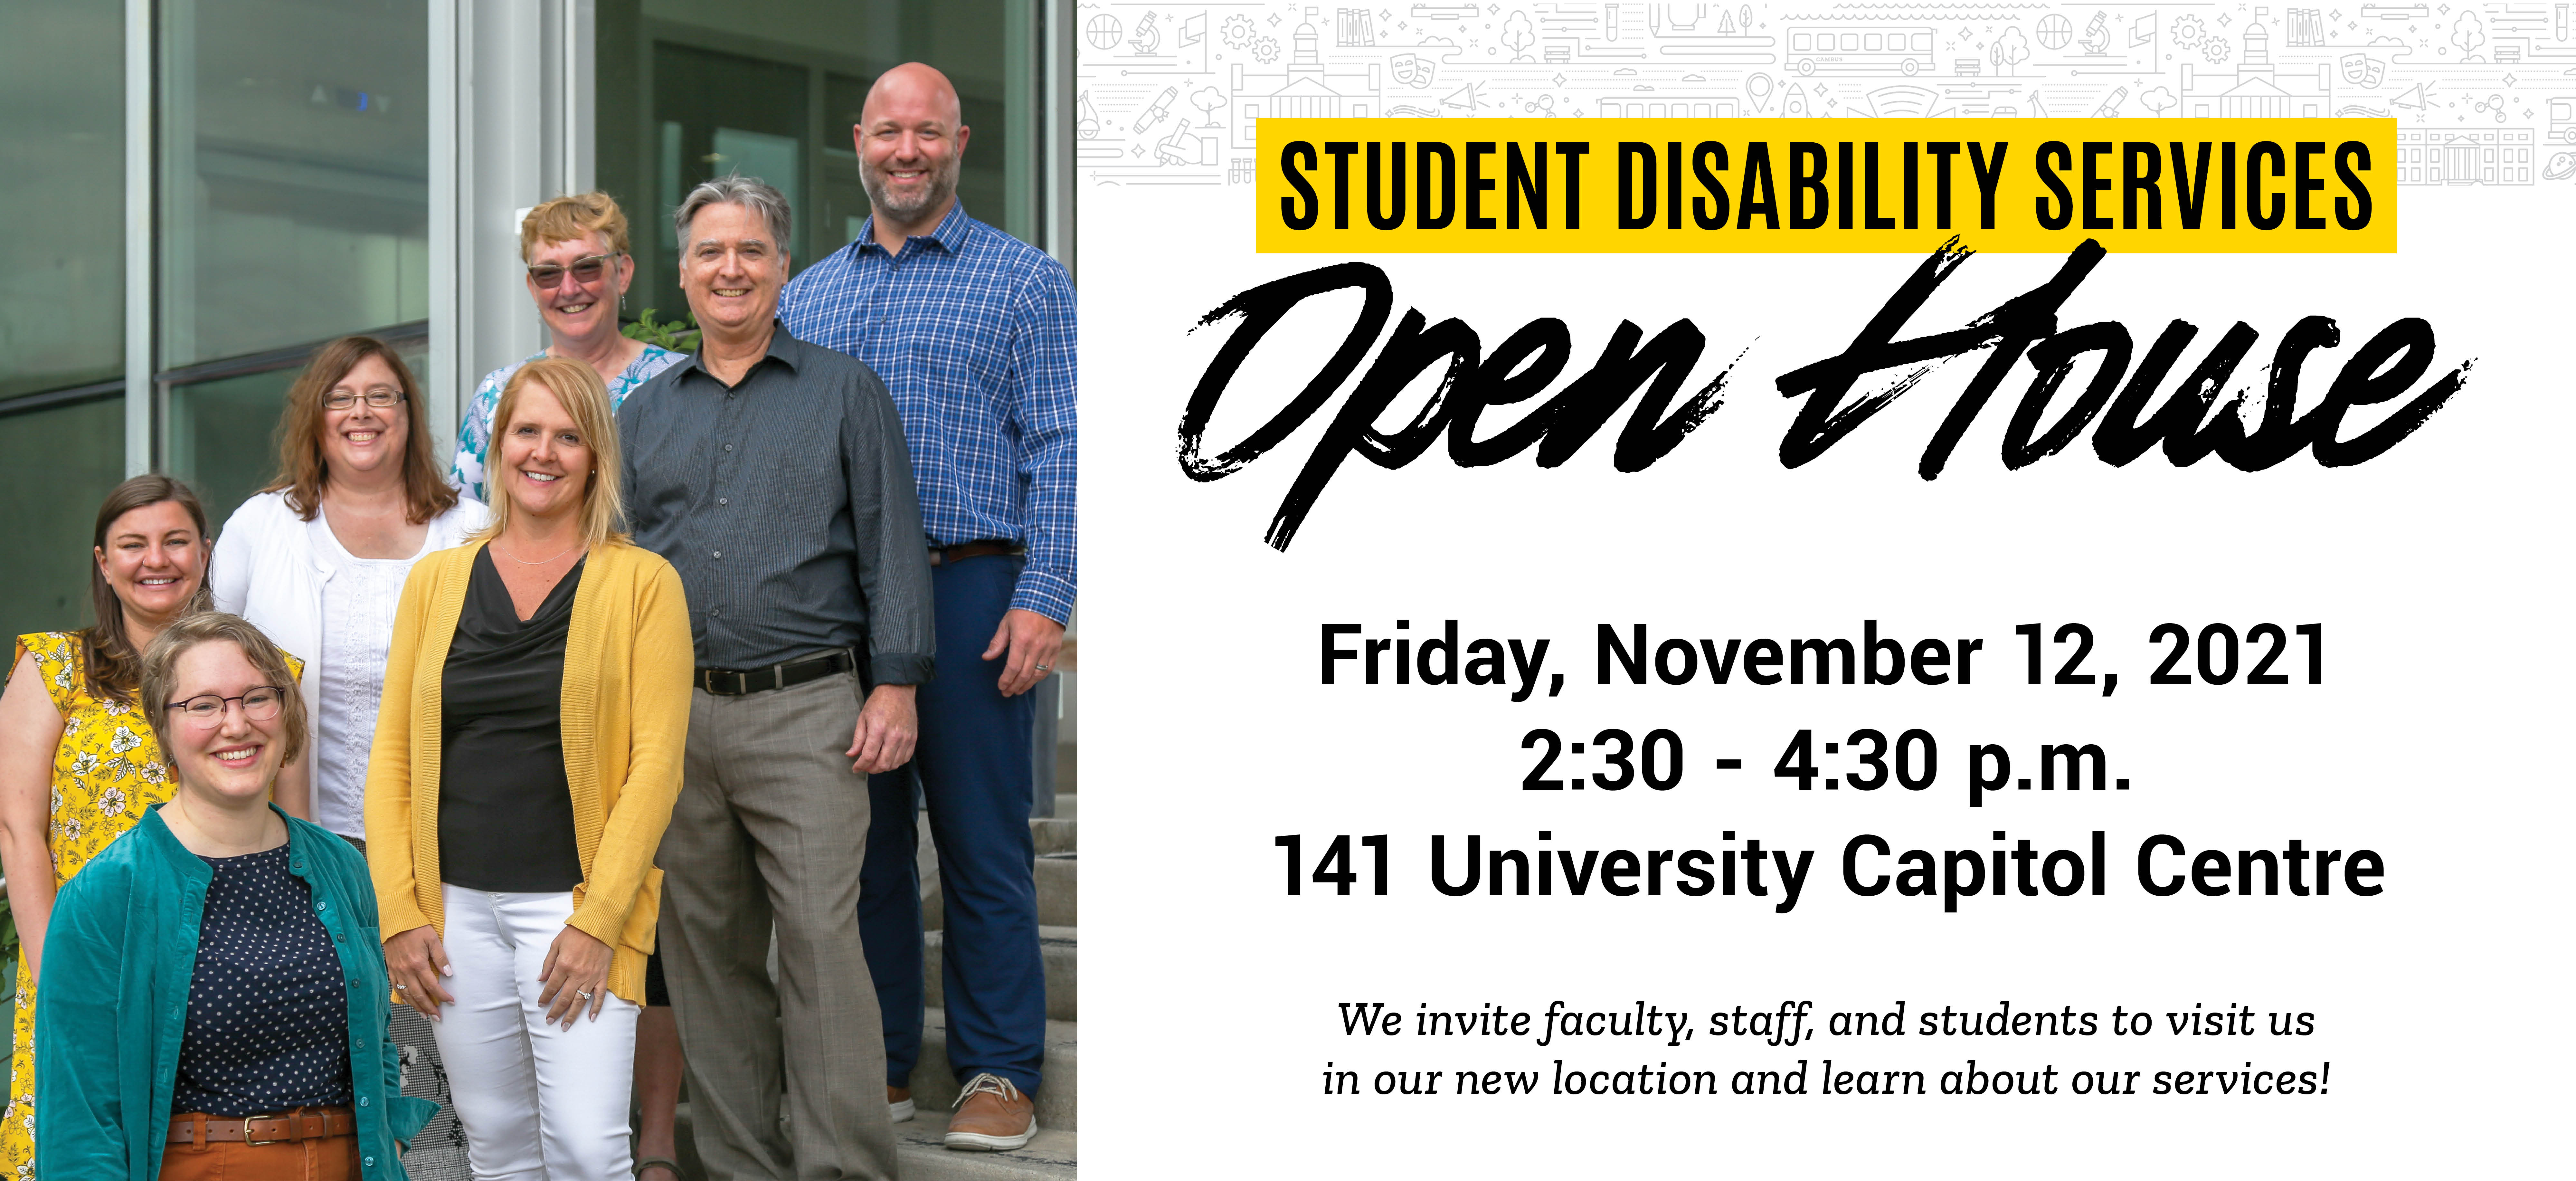 Student Disability Services Open House, Friday November 12th 2:30-4:30pm